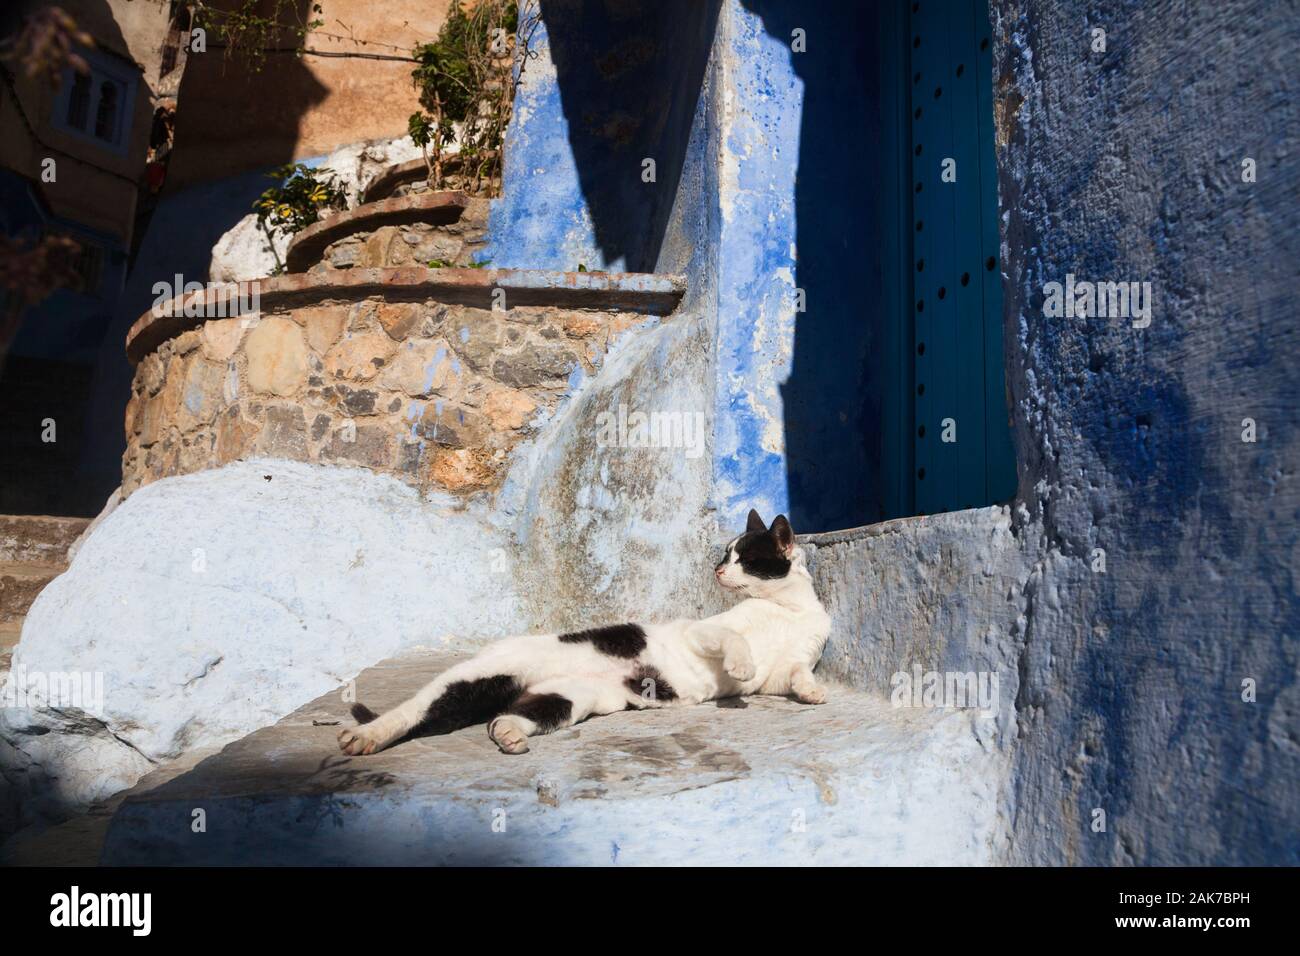 Black and white cat lying on the doorstep in front of blue door in medina of Chefchaouen (also known as Chaouen), Morocco Stock Photo